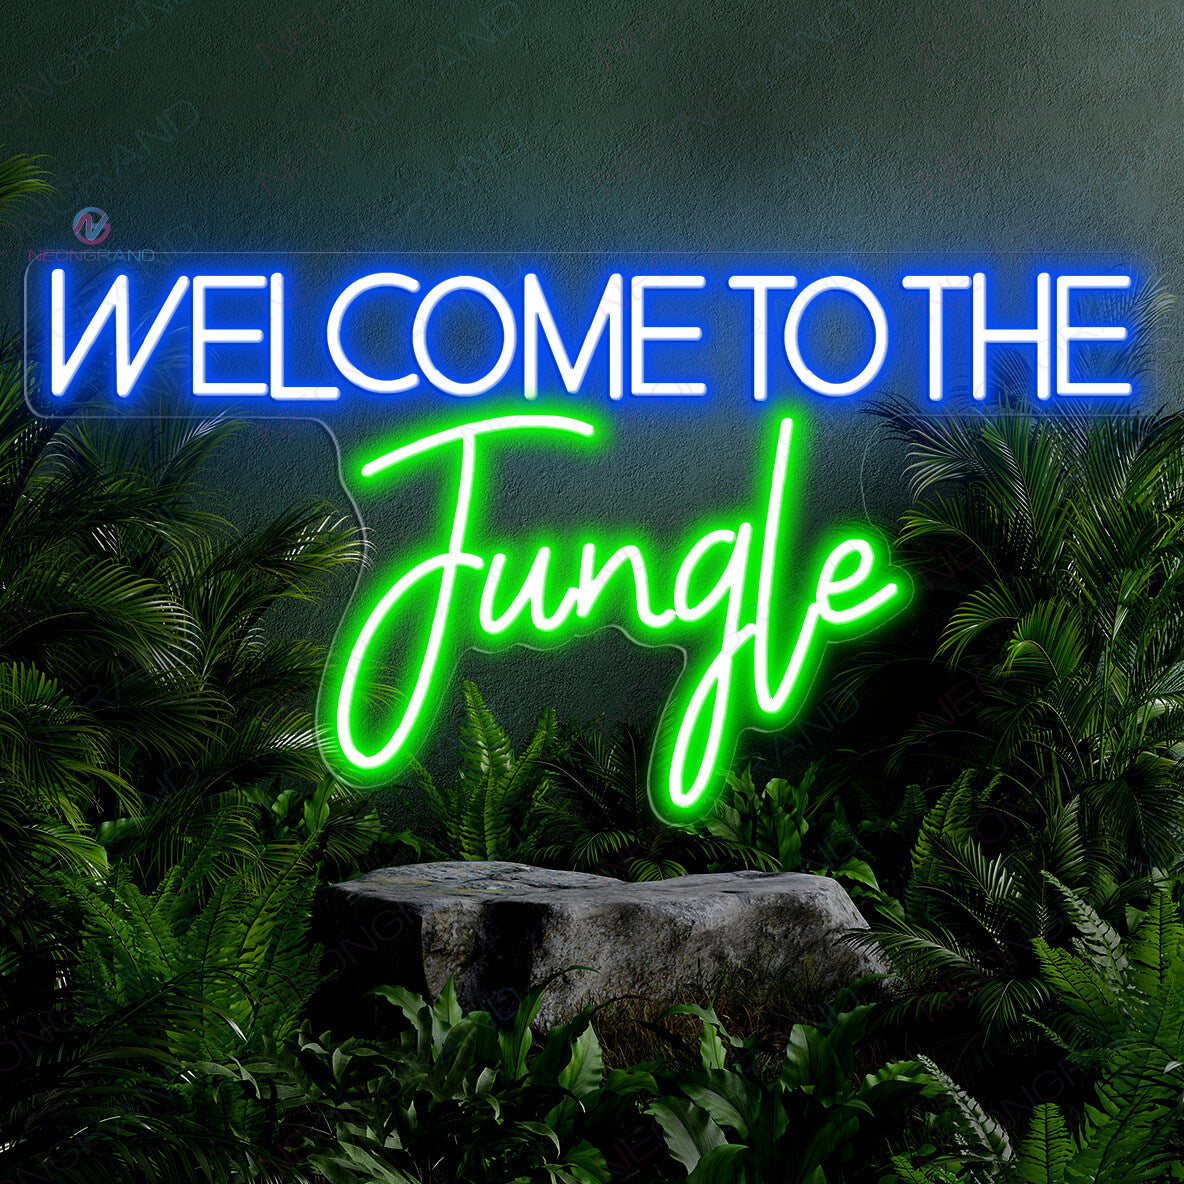 Welcome To The Jungle Neon Sign Led Light blue